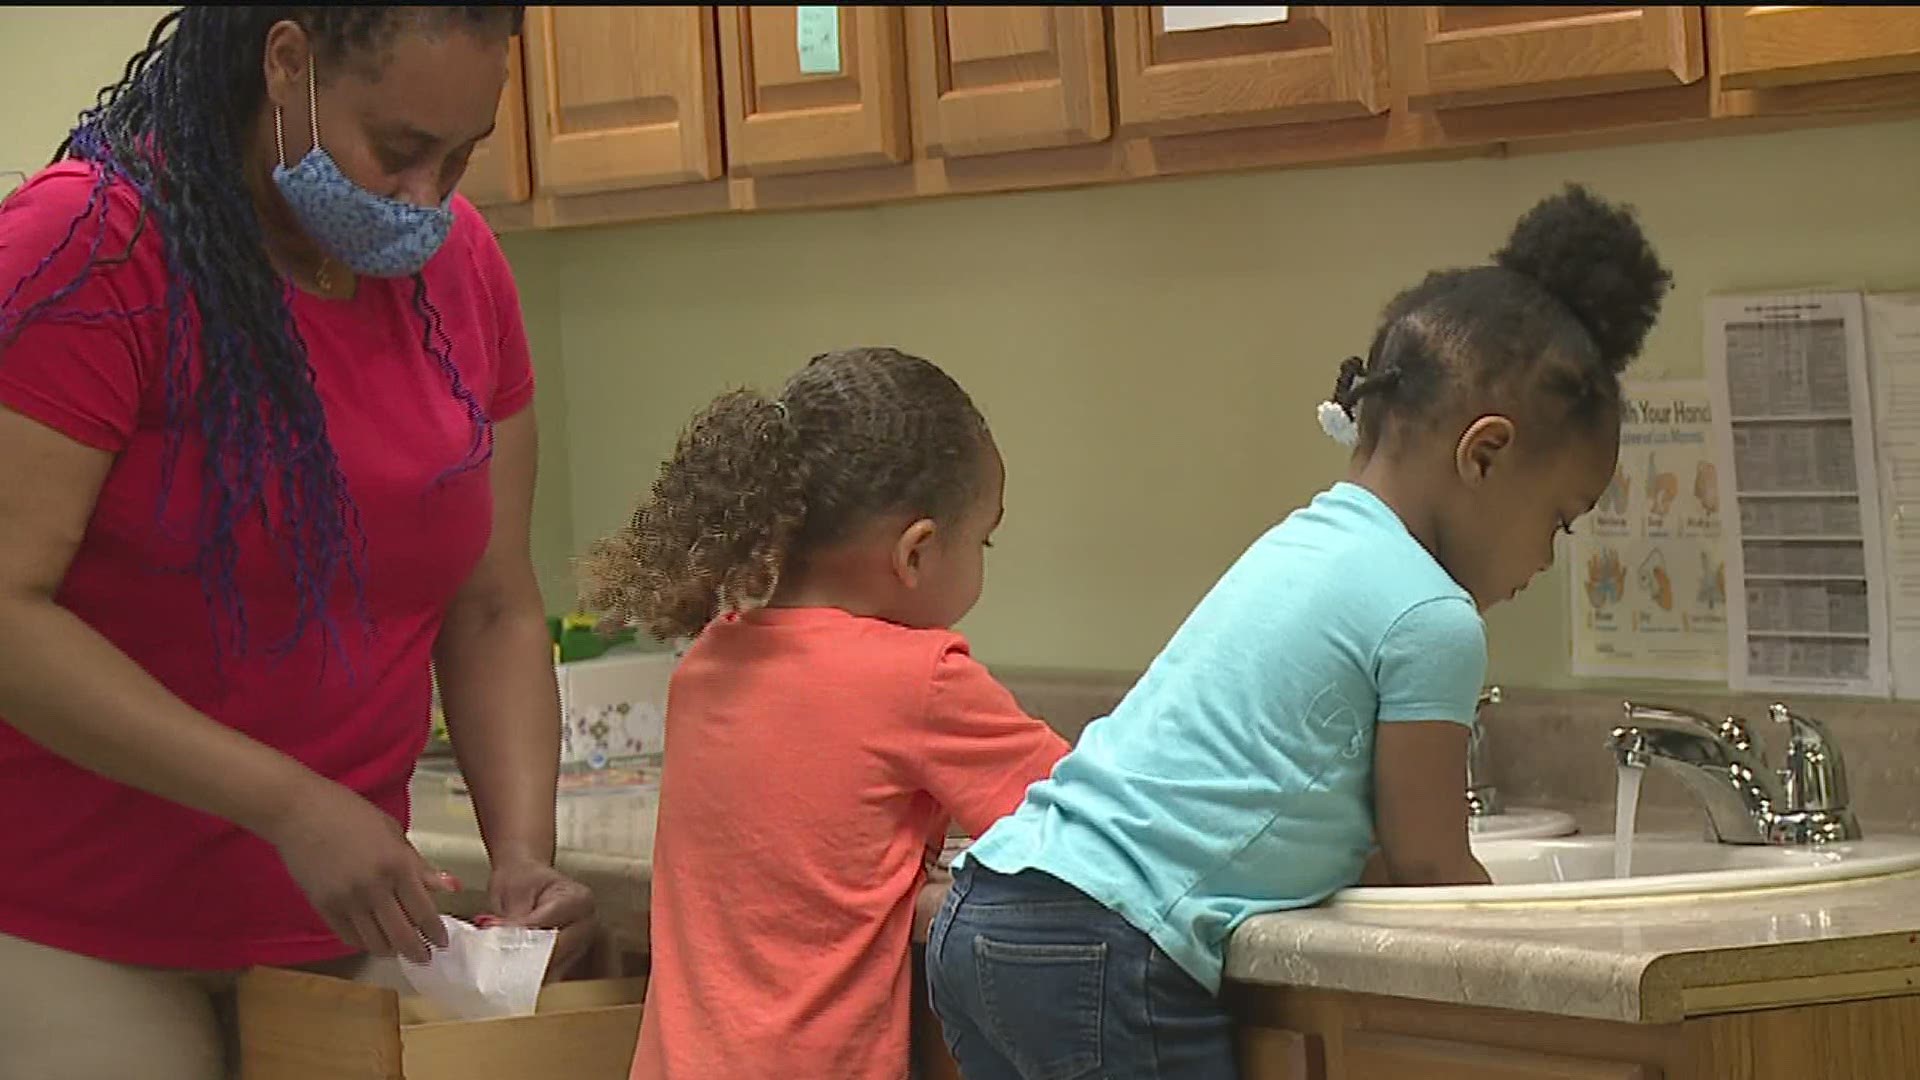 Daycares across Illinois encouraged to reopen, or expand their capacity, starting Friday.